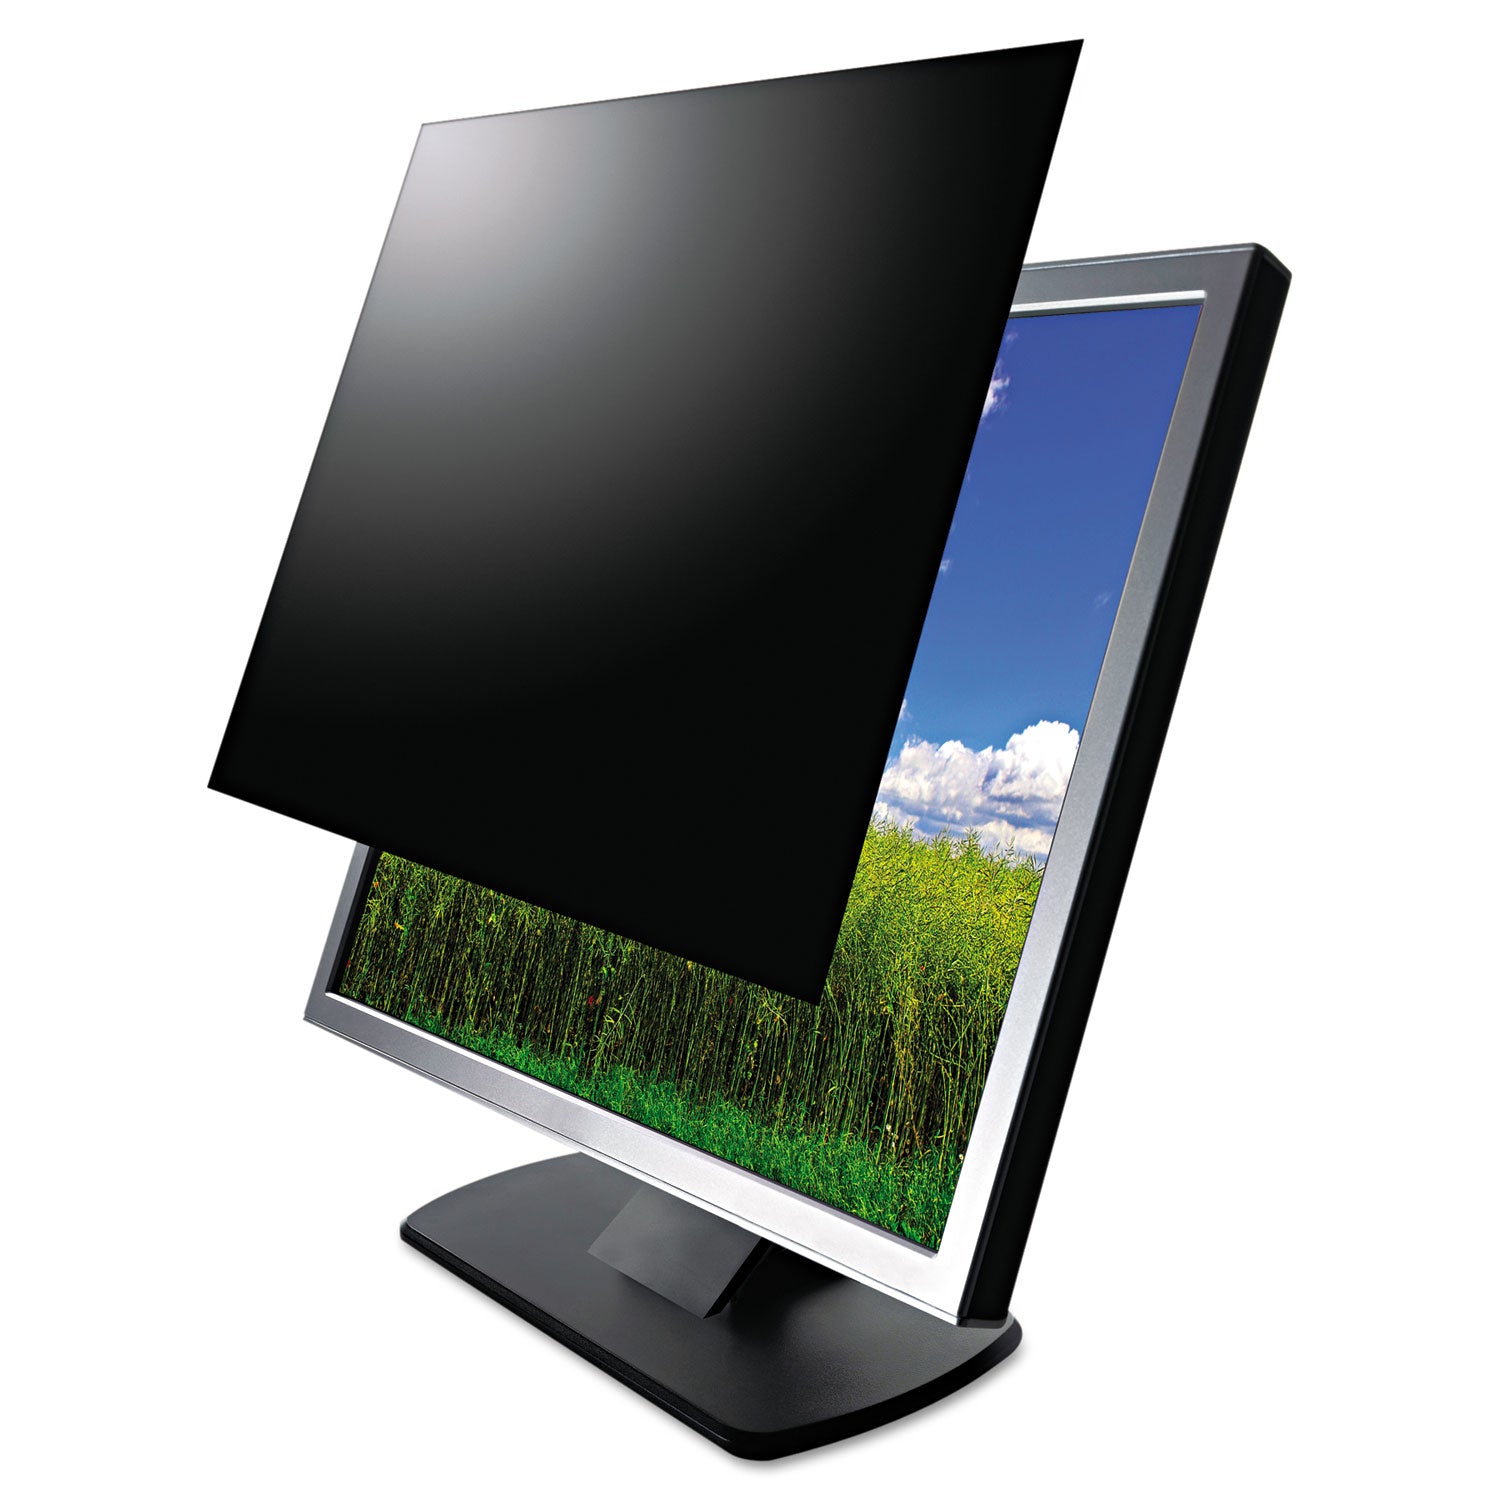 Secure View LCD Monitor Privacy Filter for 24" Widescreen Flat Panel Monitor, 16:10 Aspect Ratio - 